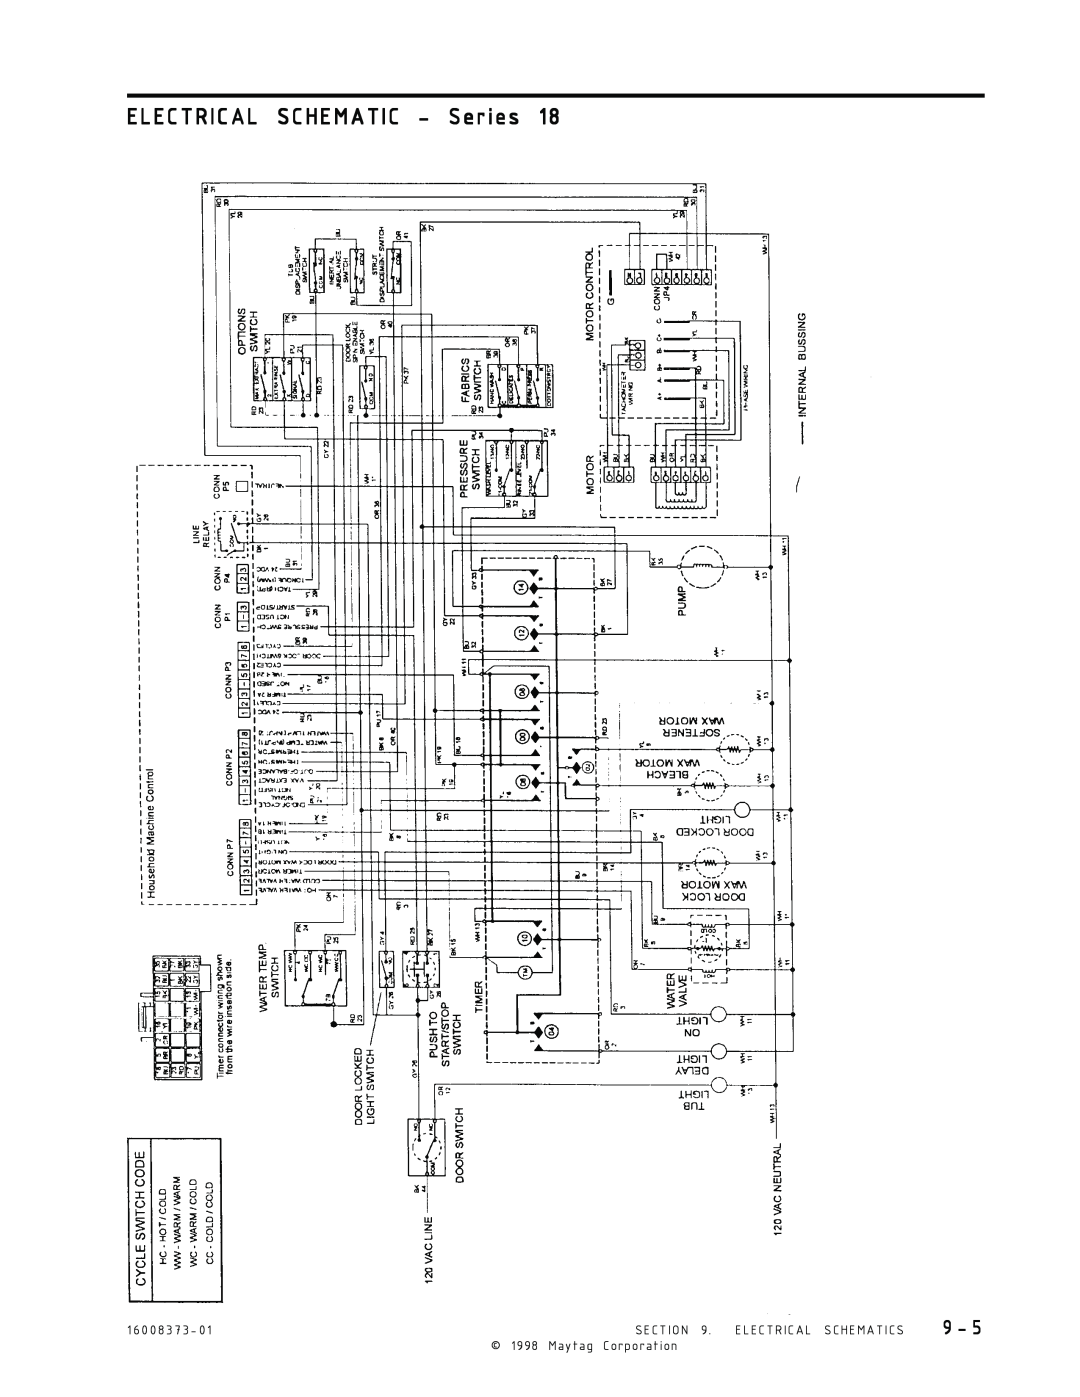 Whirlpool MAH3000 ELECTRICAL SCHEMATIC - Series, Section, Electrical Schematics, Maytag Corporation, 1 6 0 0 8 3 7 3 - 0 